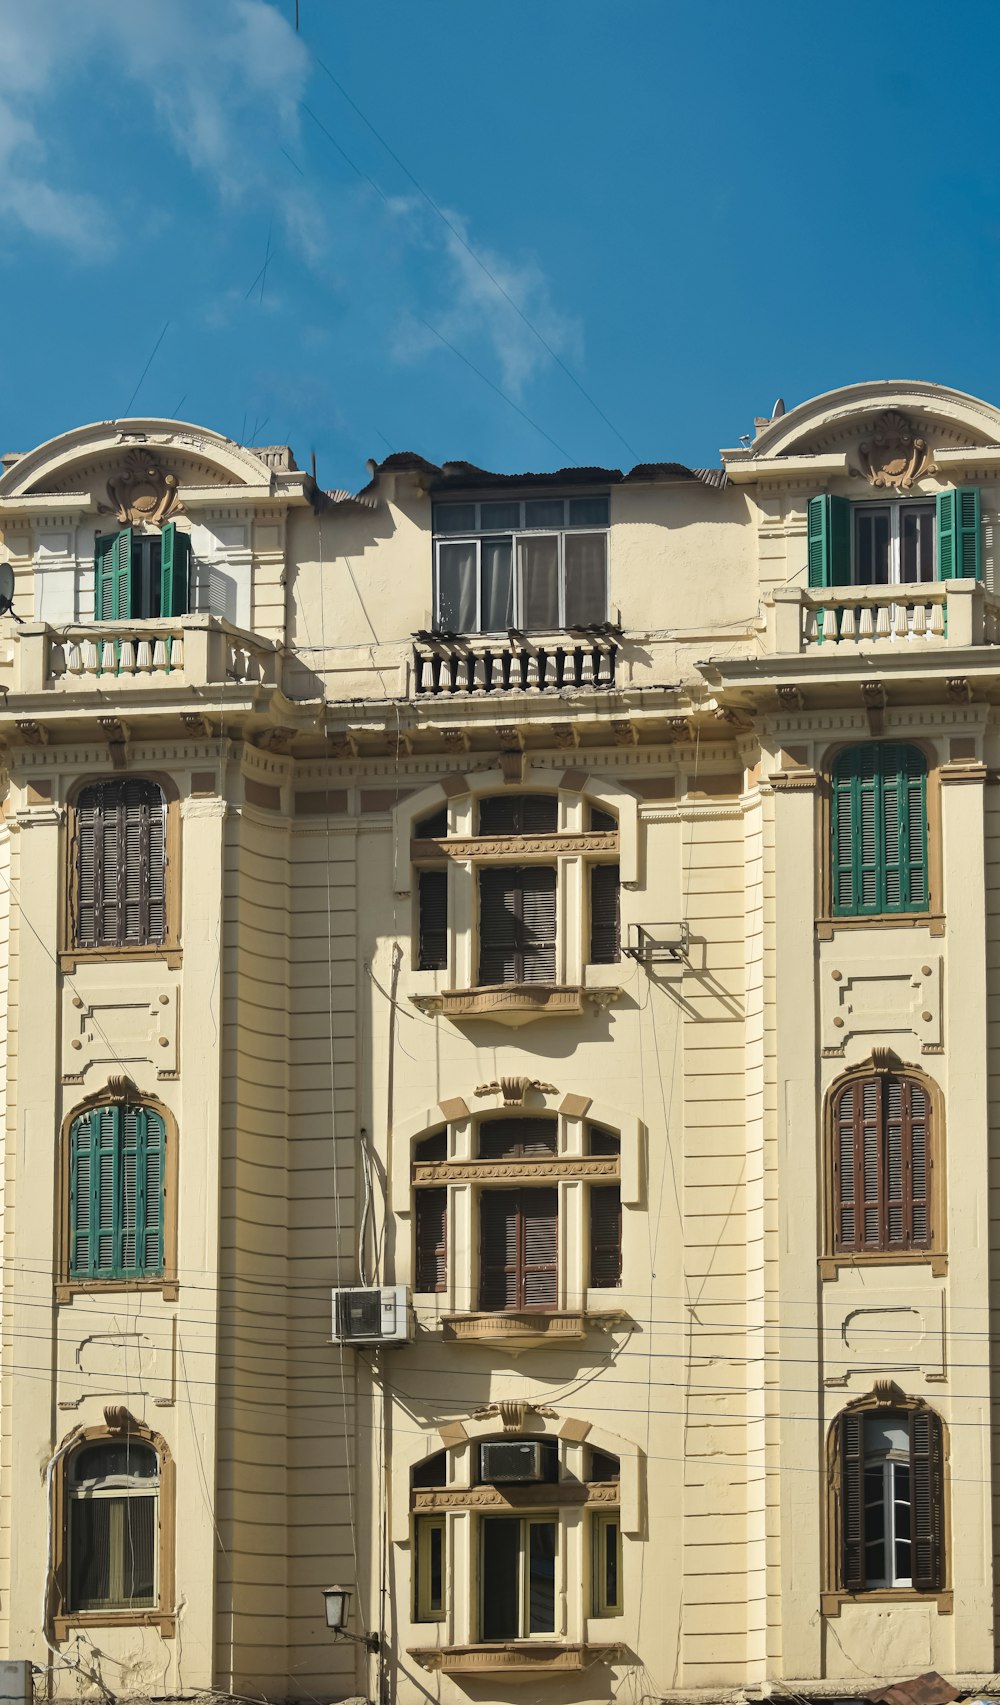 an old building with green shutters and balconies